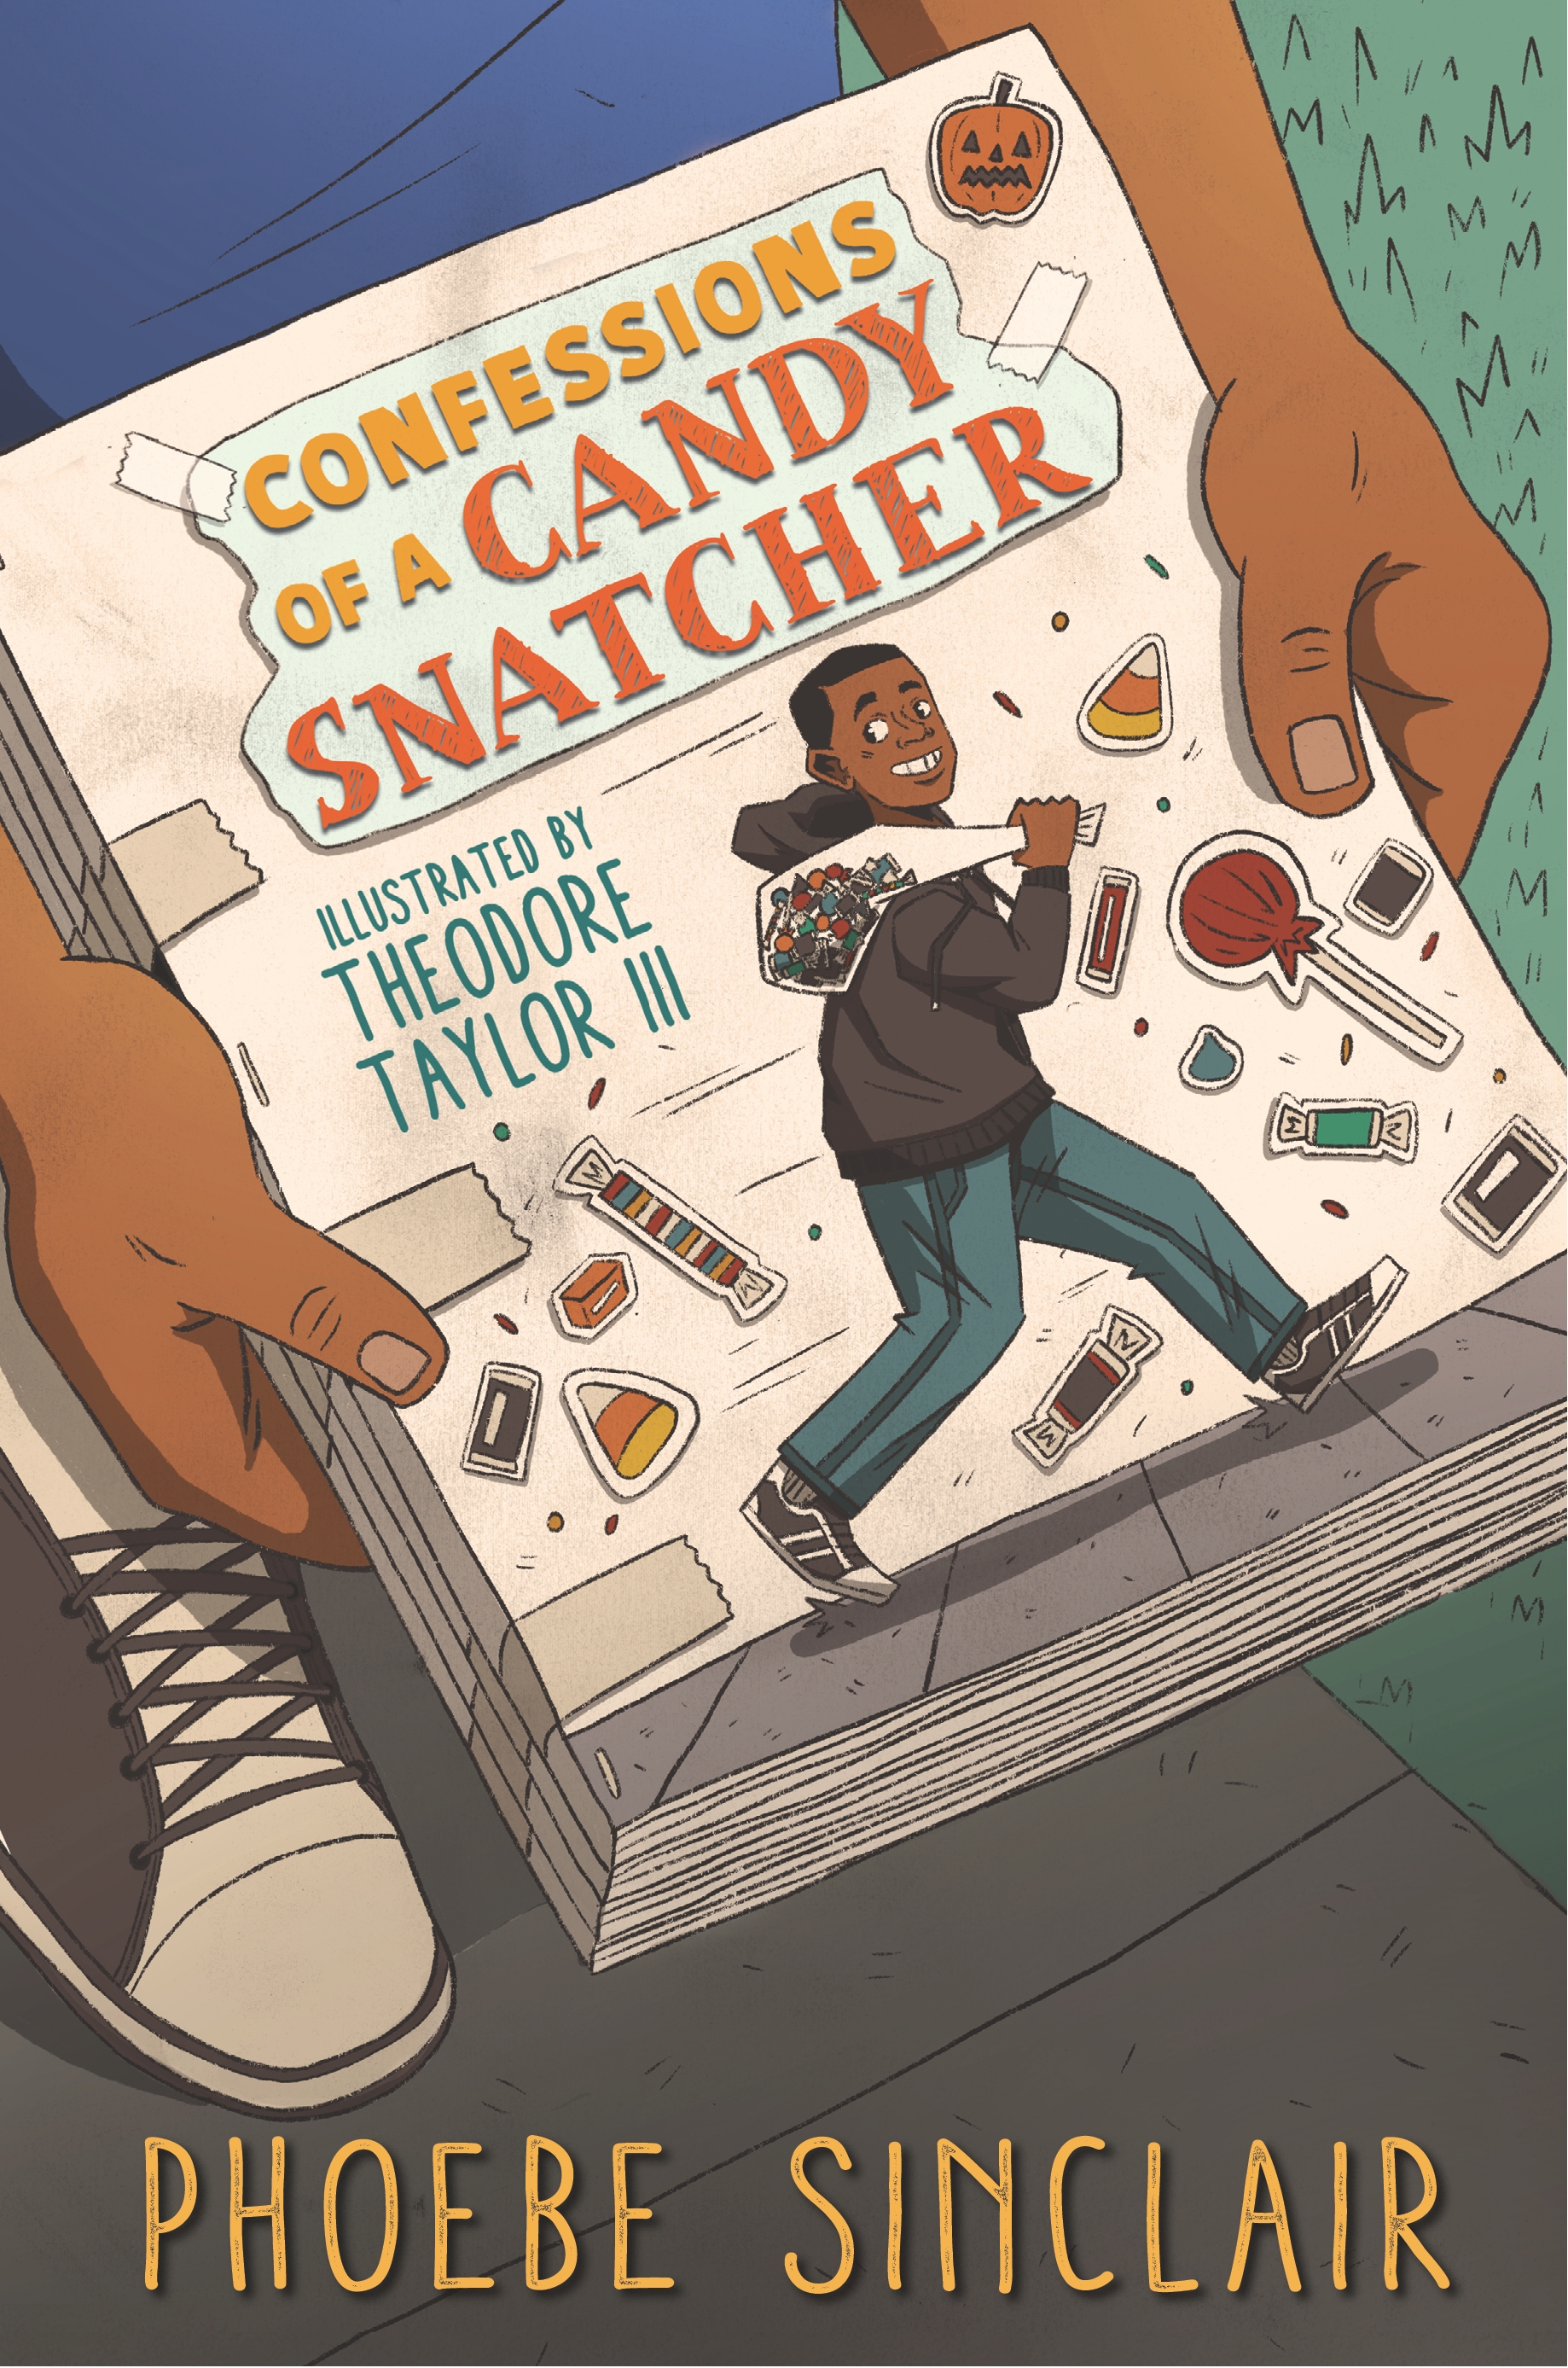 Cover image featuring two brown hands holding a handmade zine with the book's title and an illustration of a Black boy with a sack over one shoulder 